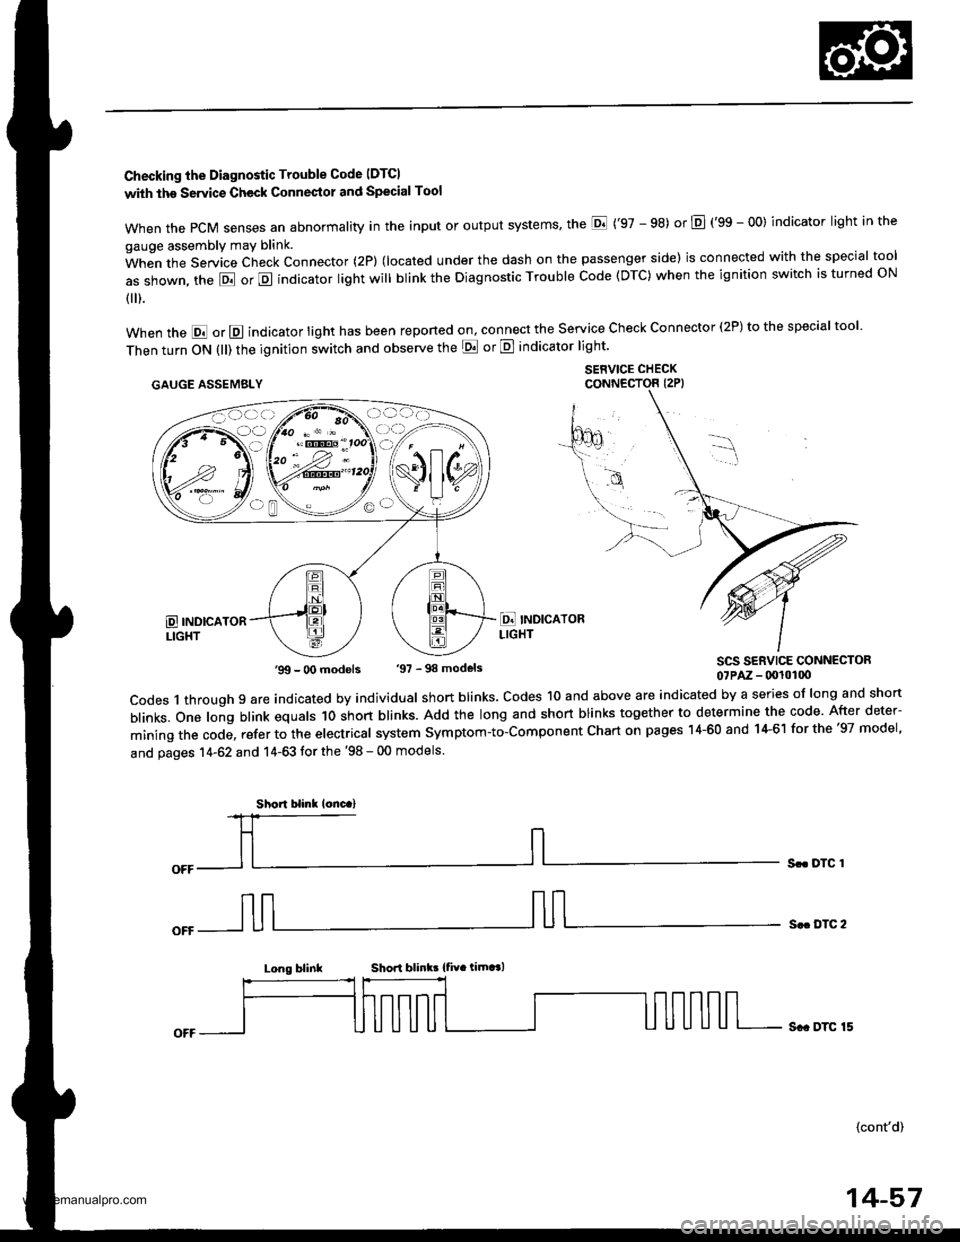 HONDA CR-V 1999 RD1-RD3 / 1.G Workshop Manual 
Checking the Diagnostic Trouble Code IDTCI
with the Servic€ Check Connestol and Special Tool
when the PcM senses an abnormality in the input or output systems the E (97 - 98) or E (gS - OO) indic